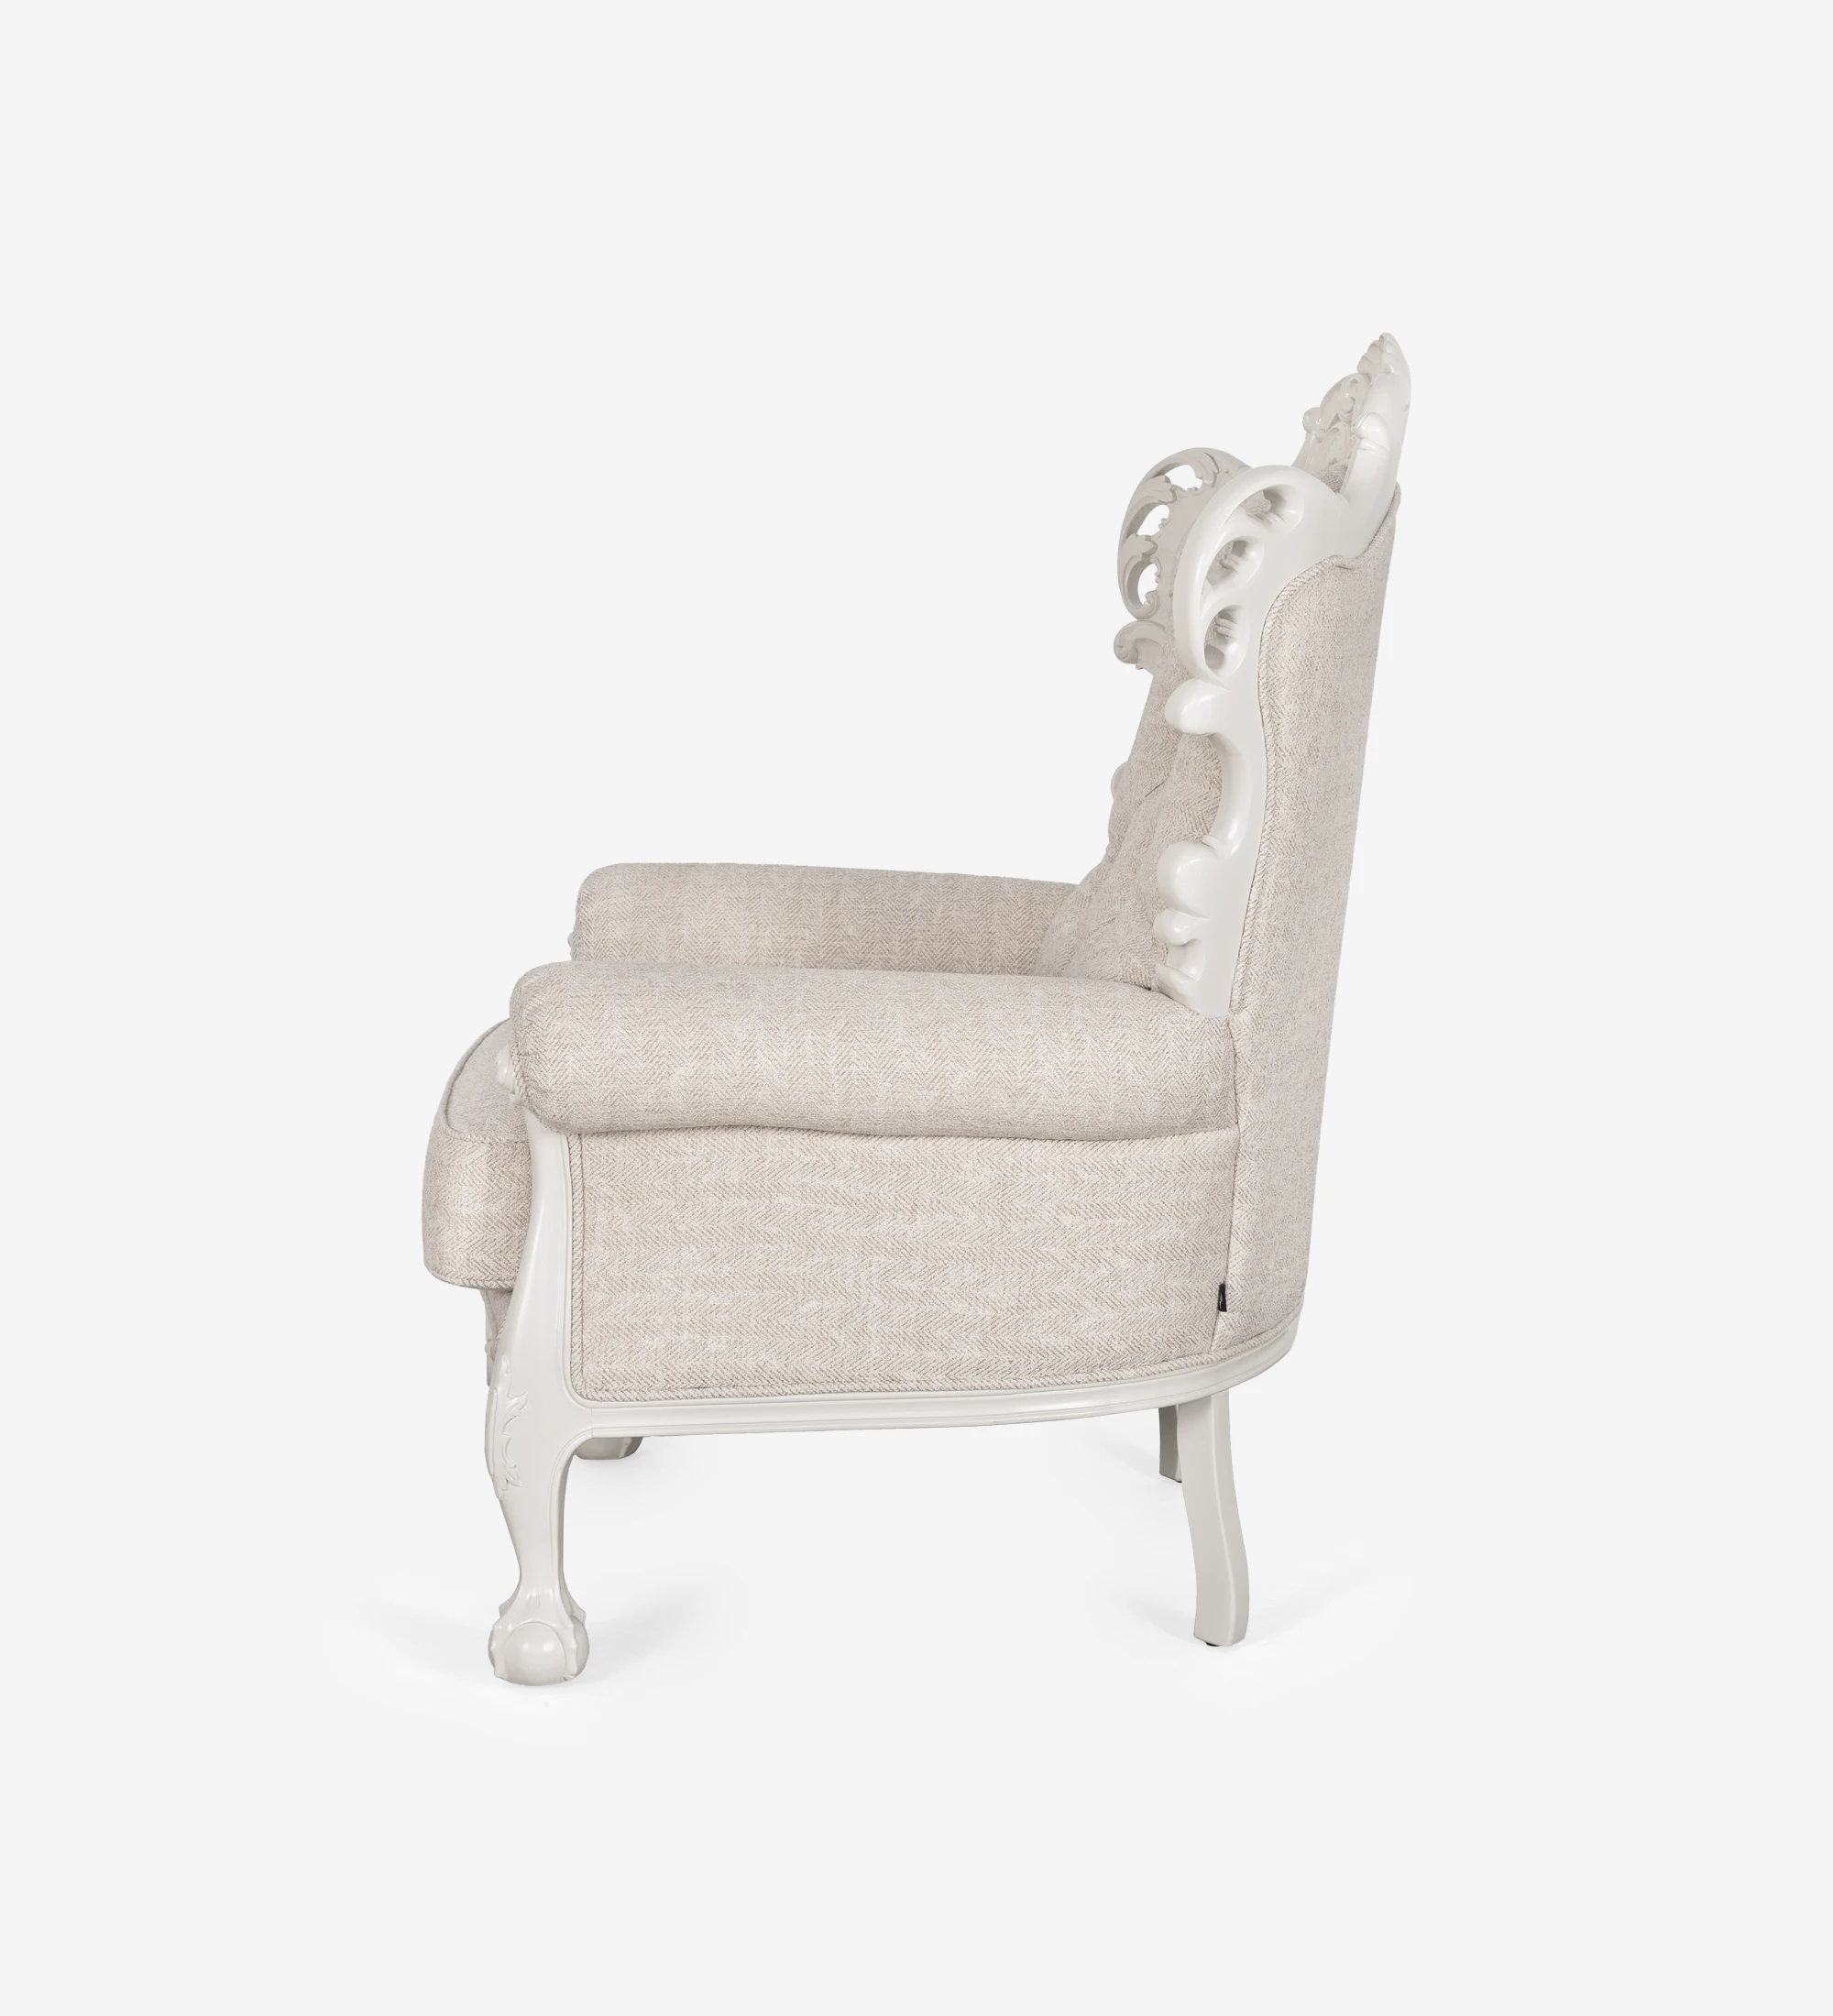 Paris armchair upholstered in beige fabric, structure and feet lacquered in pearl.